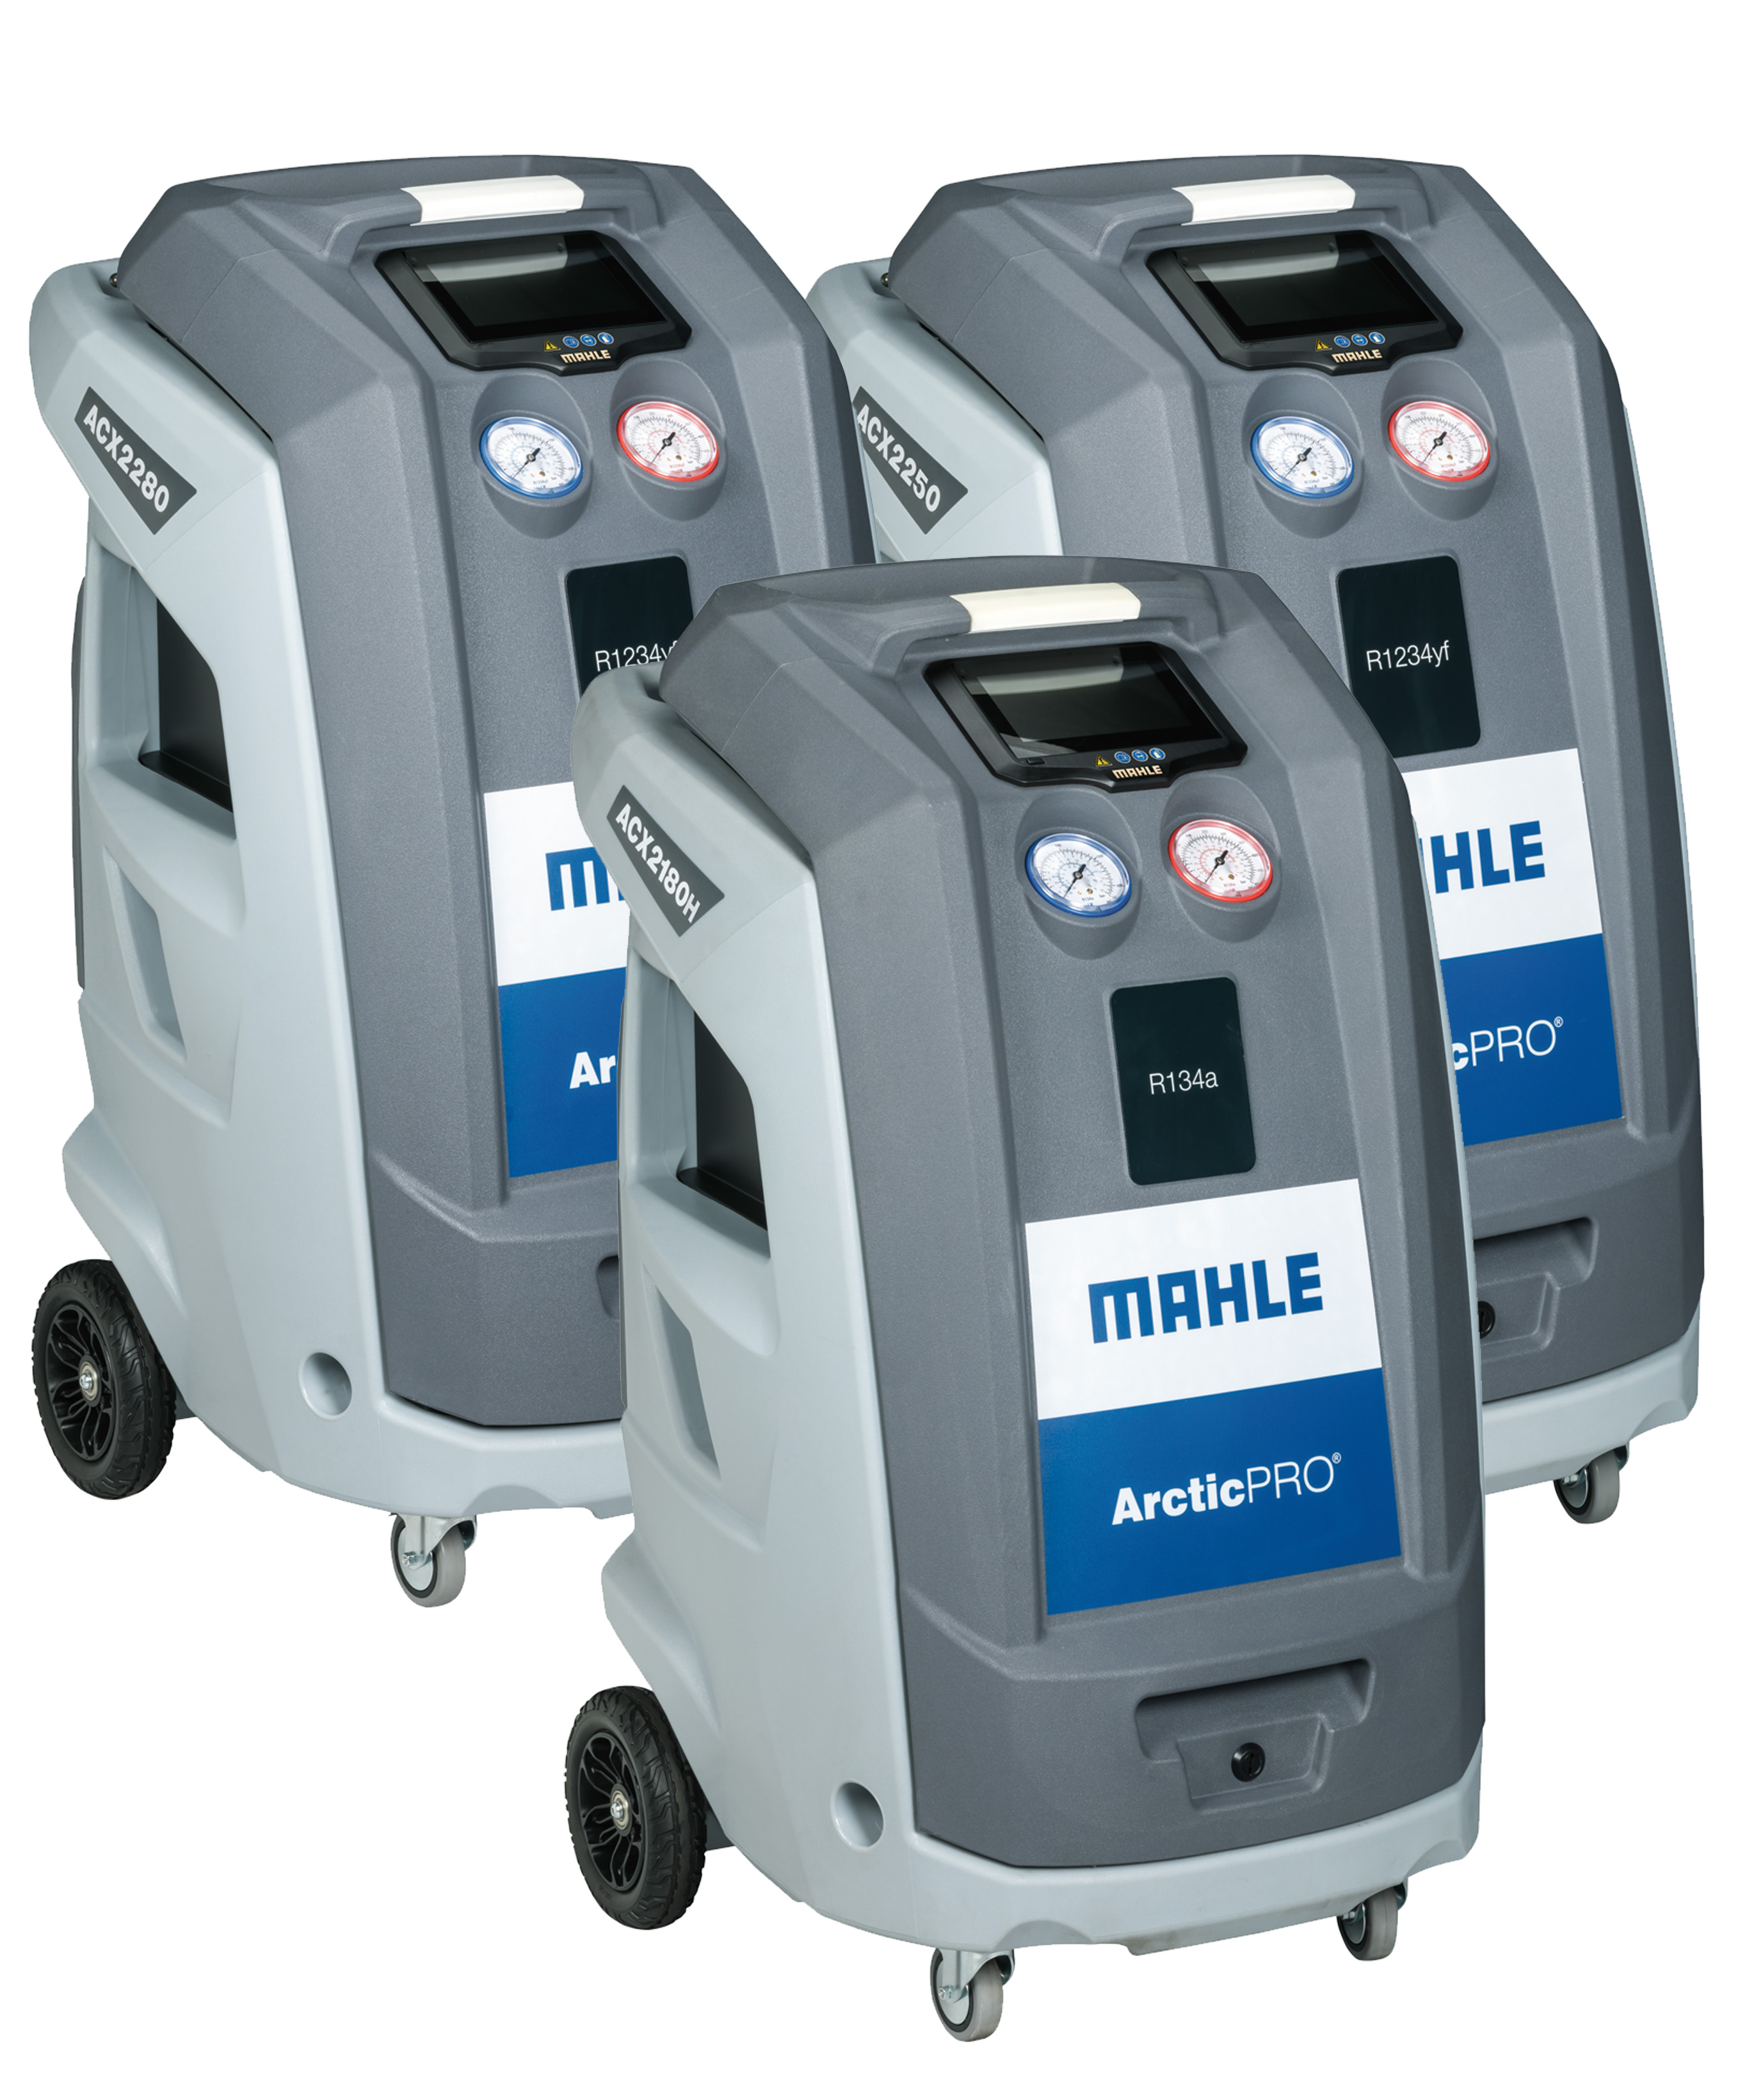 MAHLE ArticPRO units for shops to ensure safe, compliant handling of air conditioning compressors. 